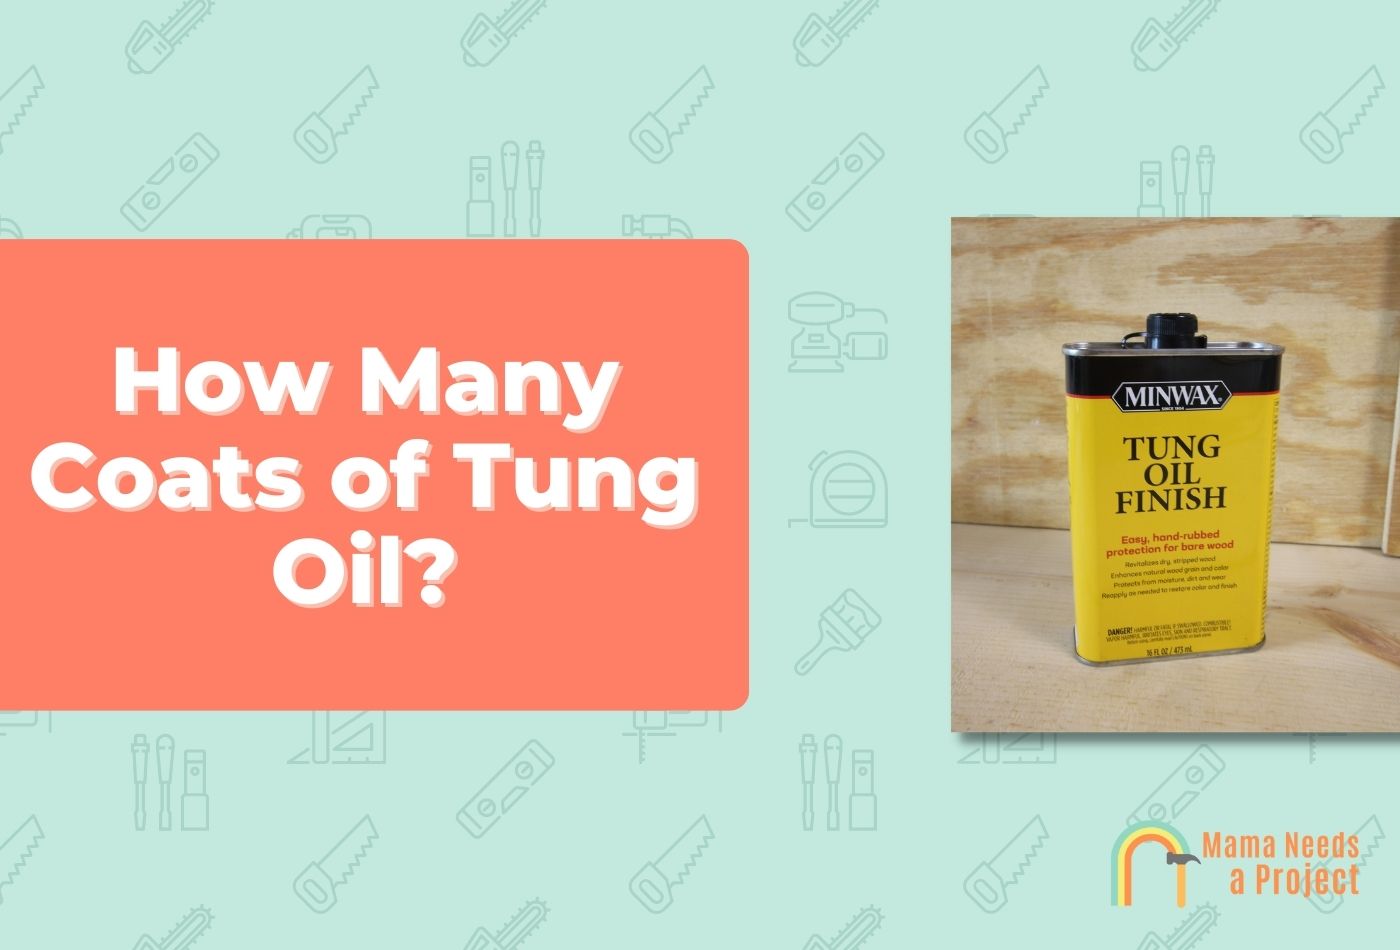 How Many Coats of Tung Oil?